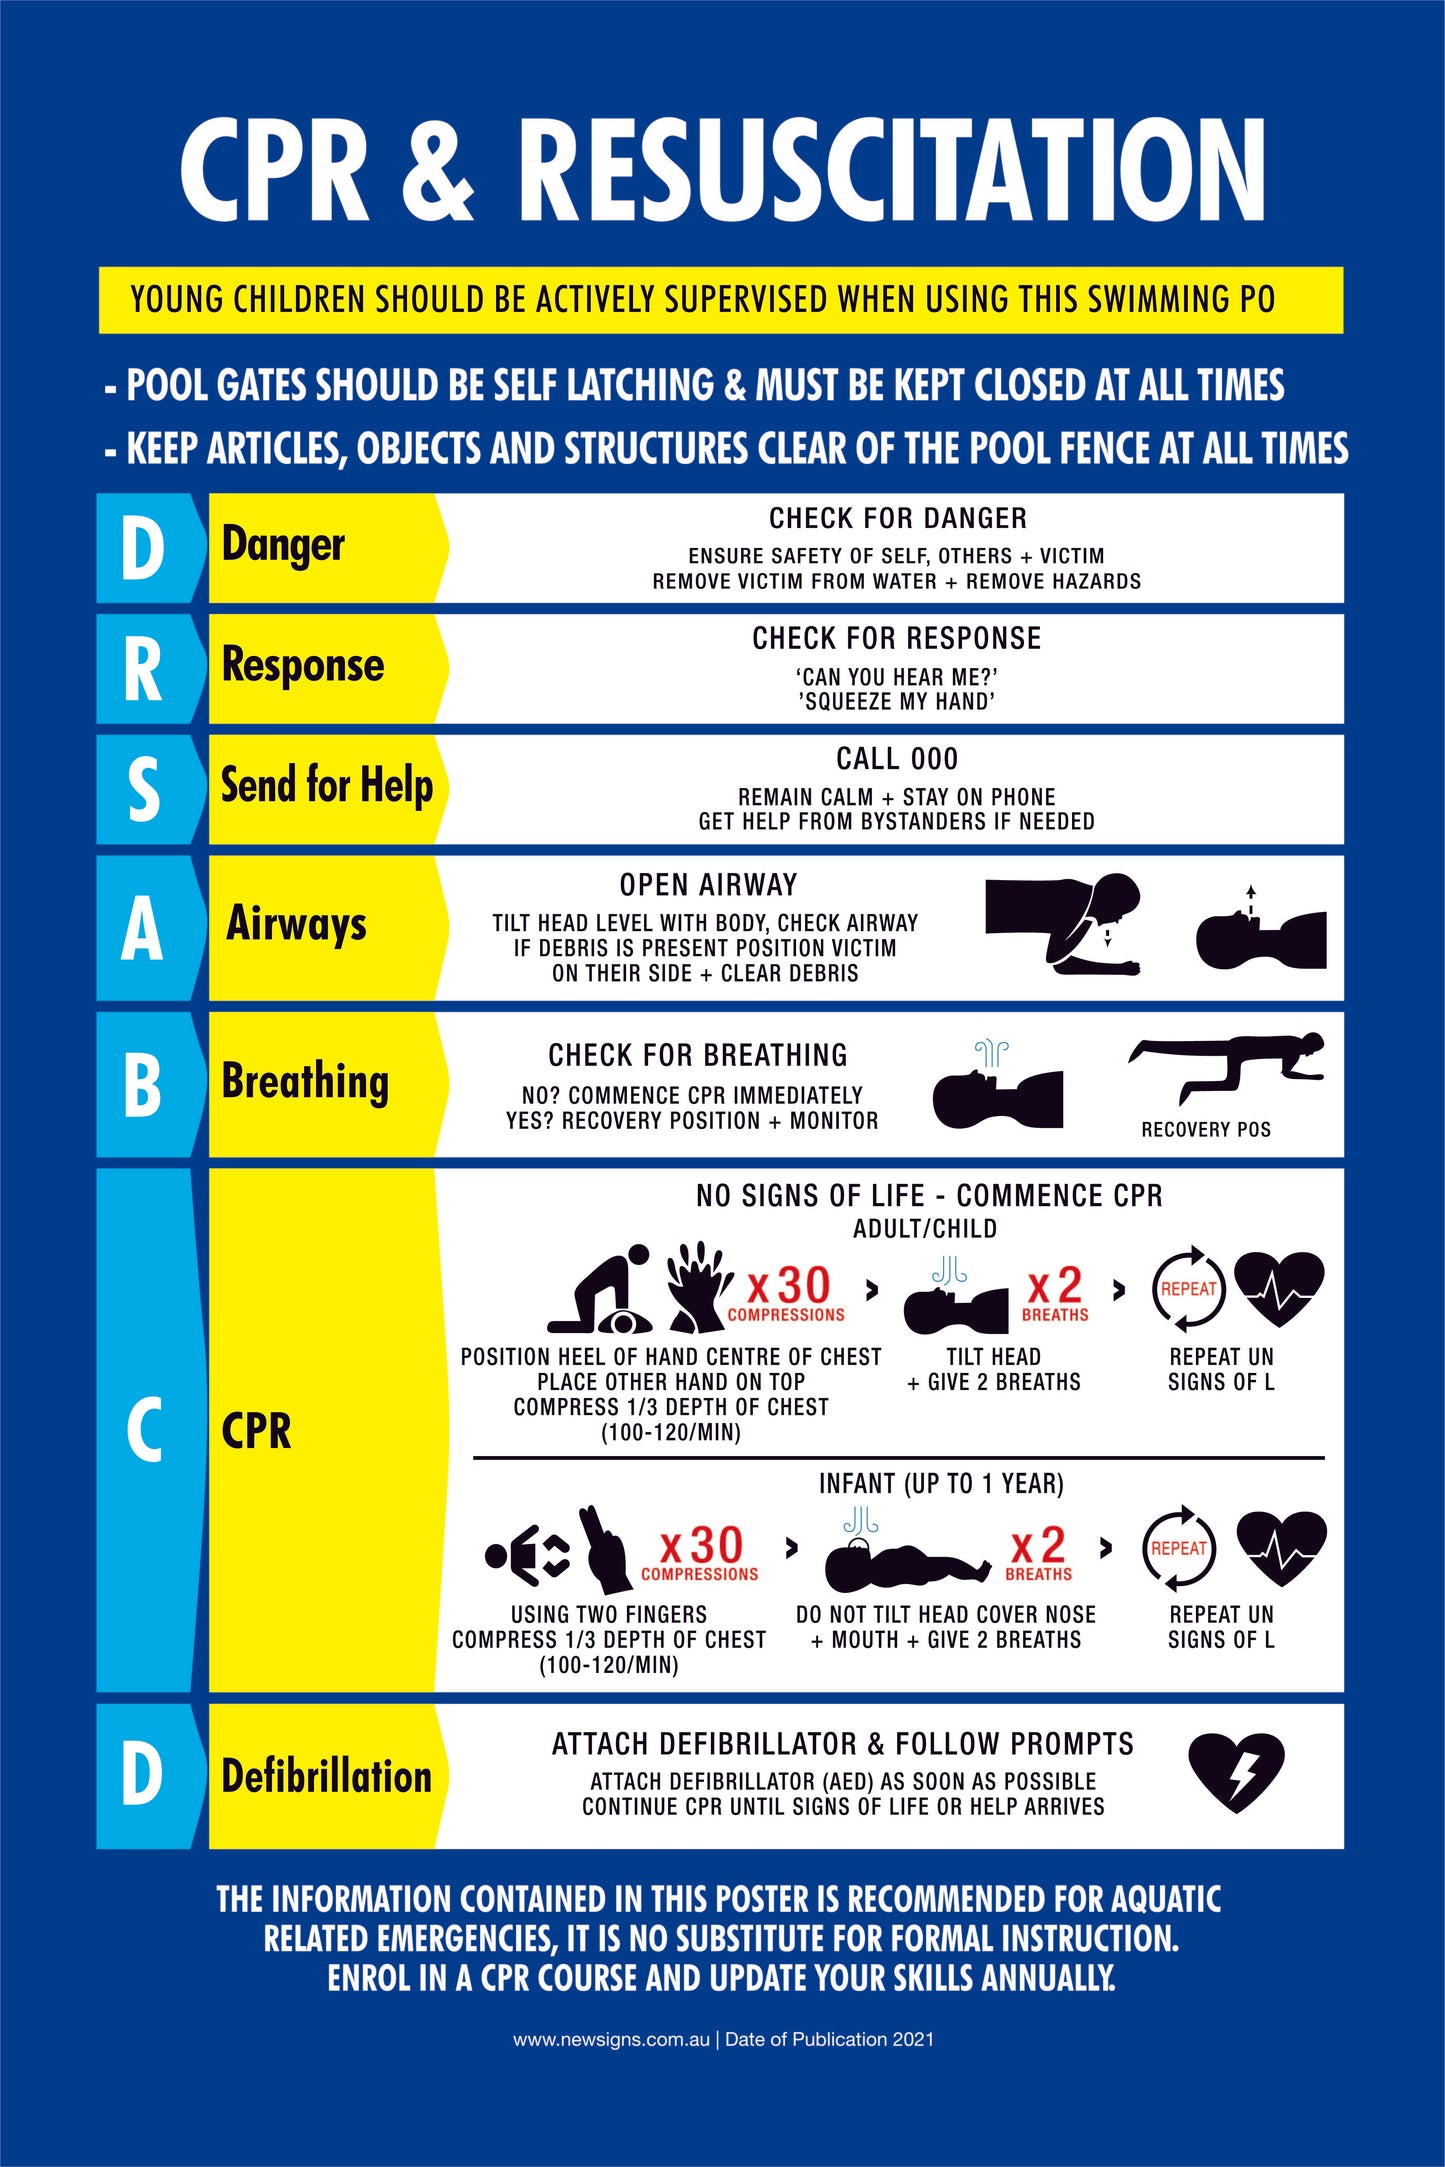 CPR Resuscitation Guide 7 Sign